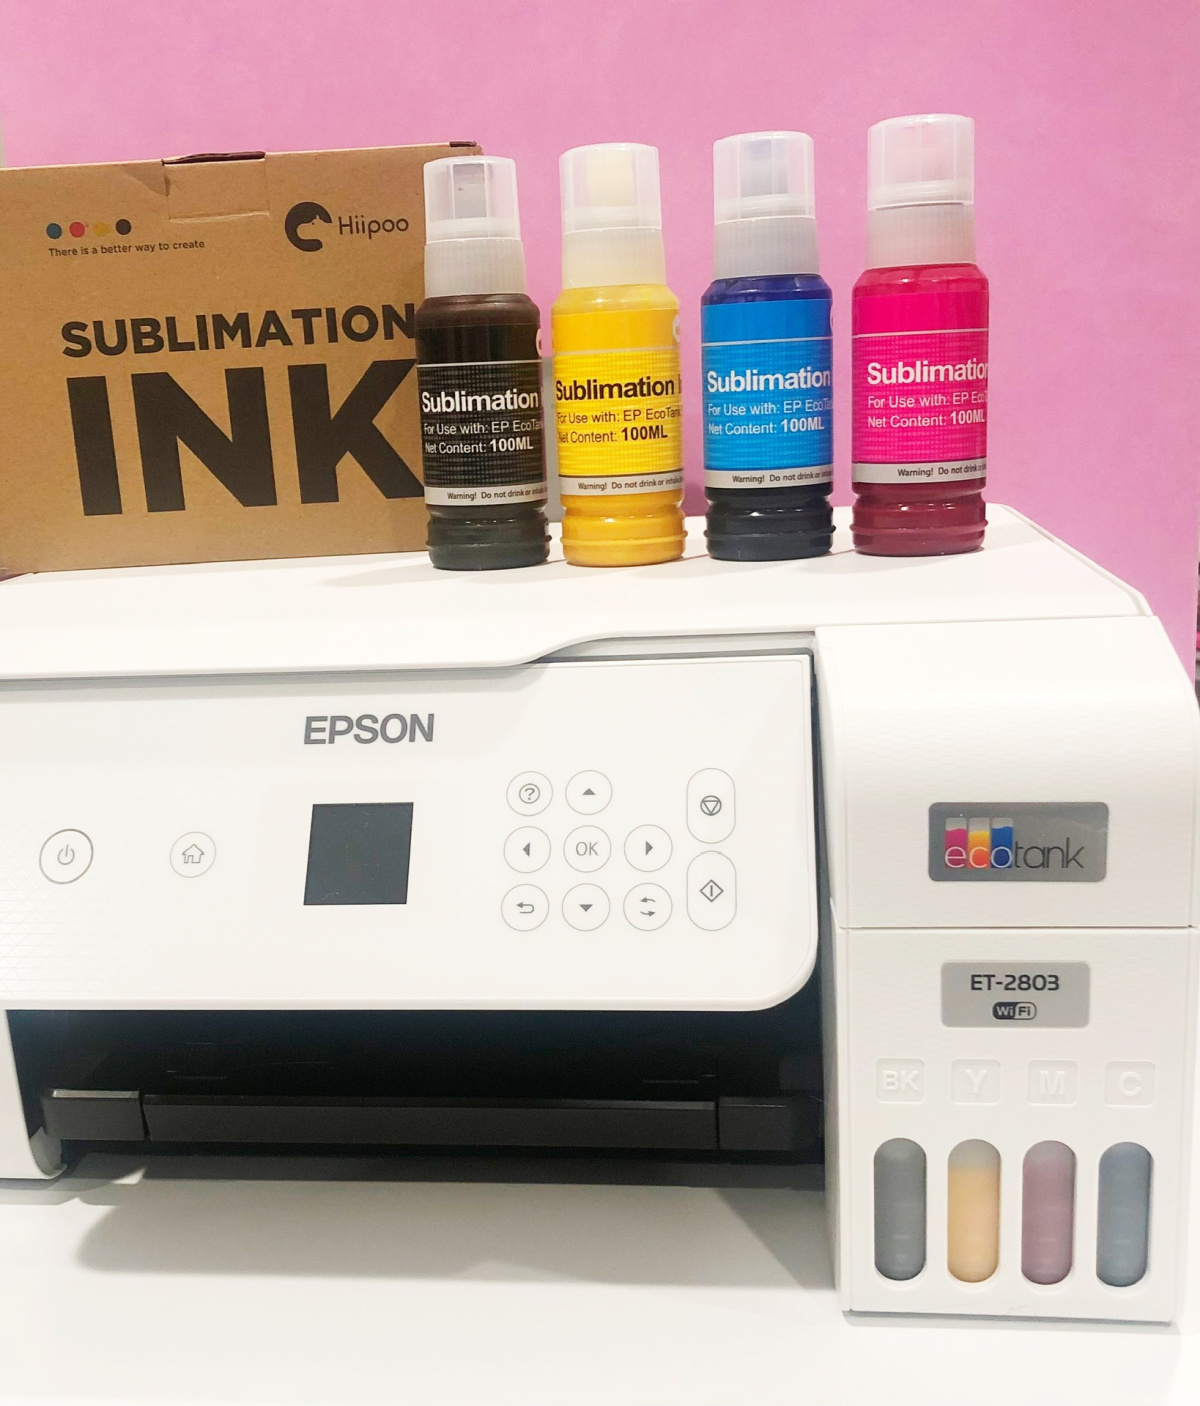 Epson Eco Tank Printer with bottles of Hiipoo ink sitting on the top